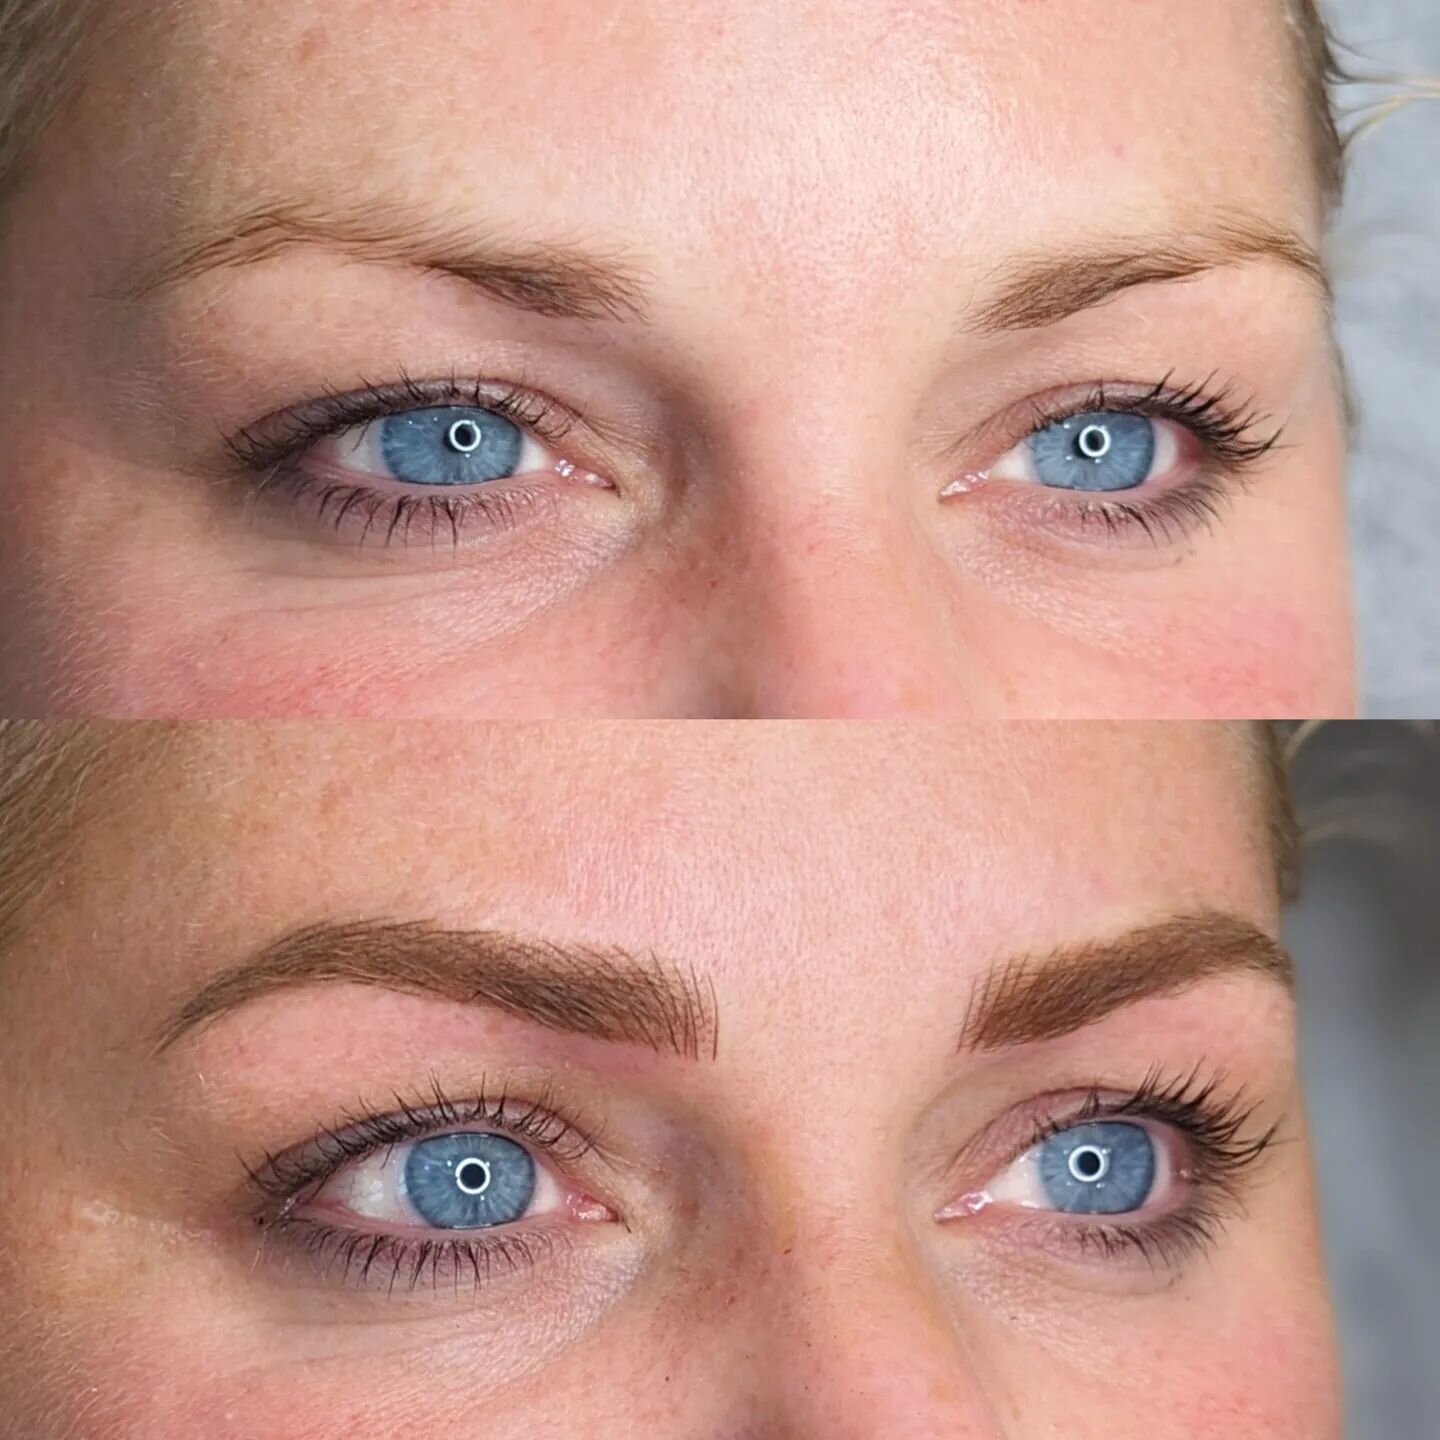 Stunning microblade and shade brows on the most beautiful blue eyes I have ever seen! 💙

For enquiries, availability or to book please email me by clicking on the website link in my bio.

#microblading #eyebrows #browtattoo #wynyard #permanentmakeup